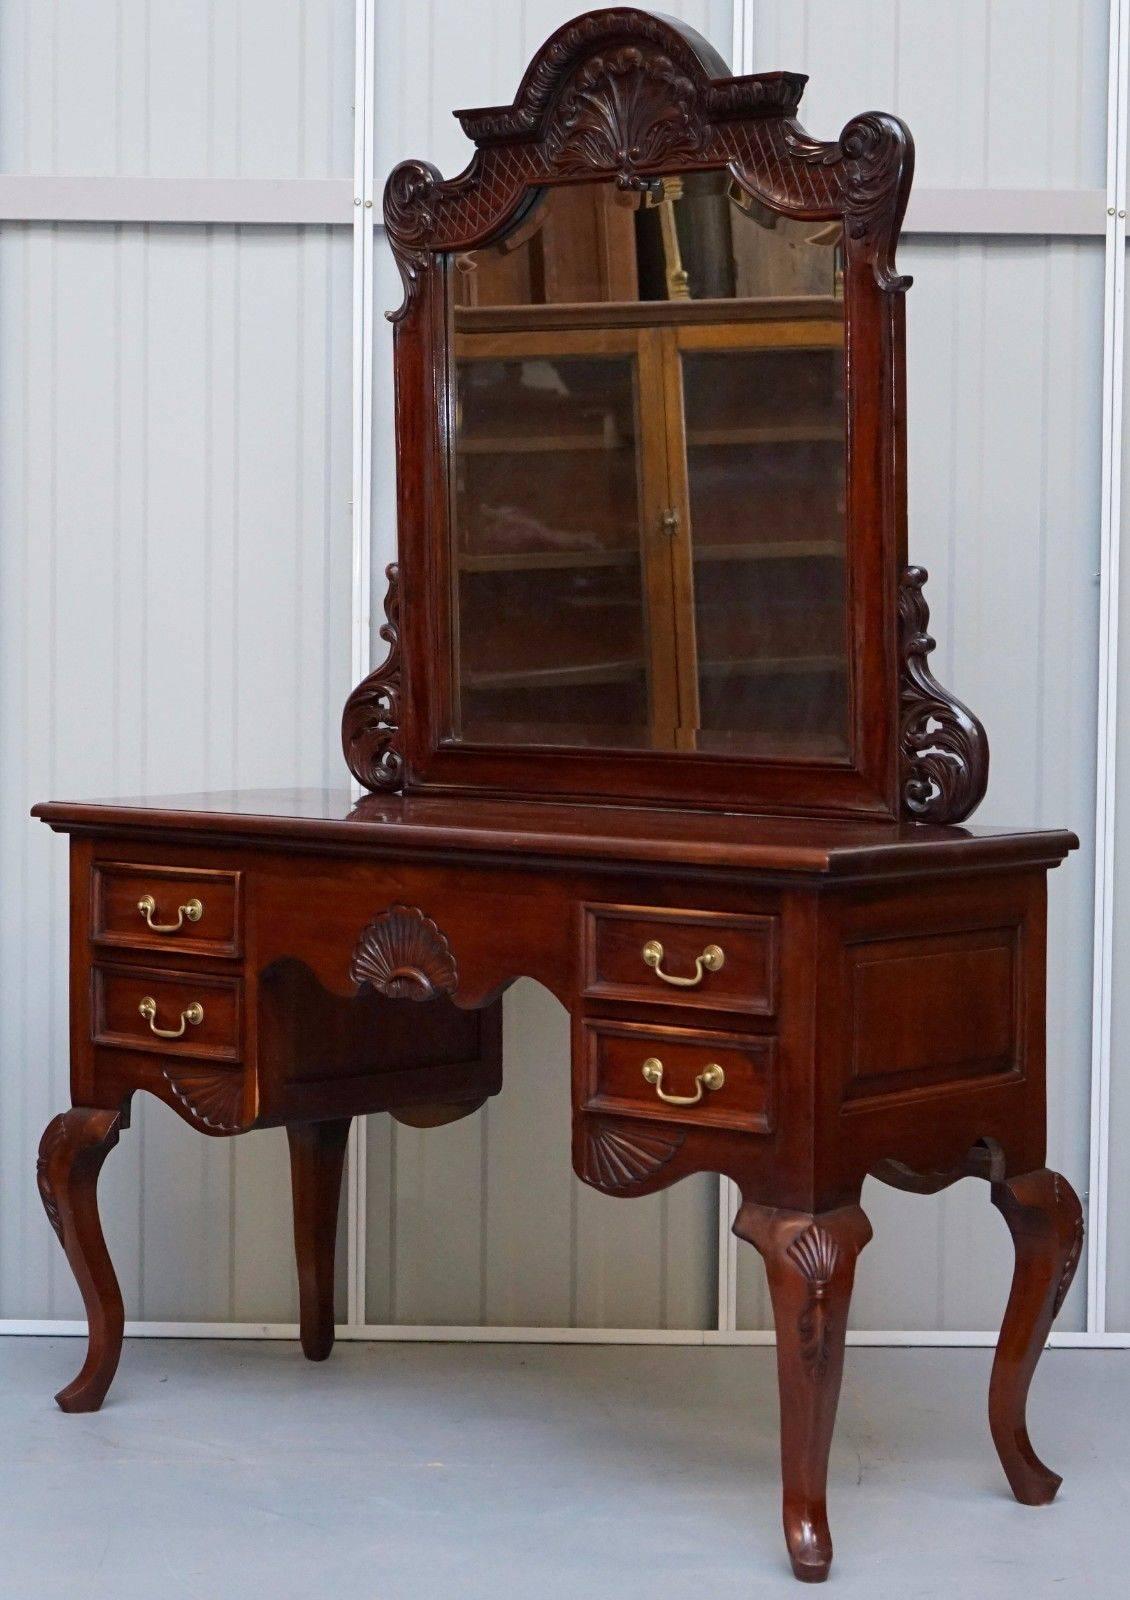 We are delighted to offer for sale this lovely solid nicely carved mahogany dressing table with mirror and chair

A great pair in fantastic condition, the mirror is slightly arched forward so you can see yourself in all your splendor!

Condition